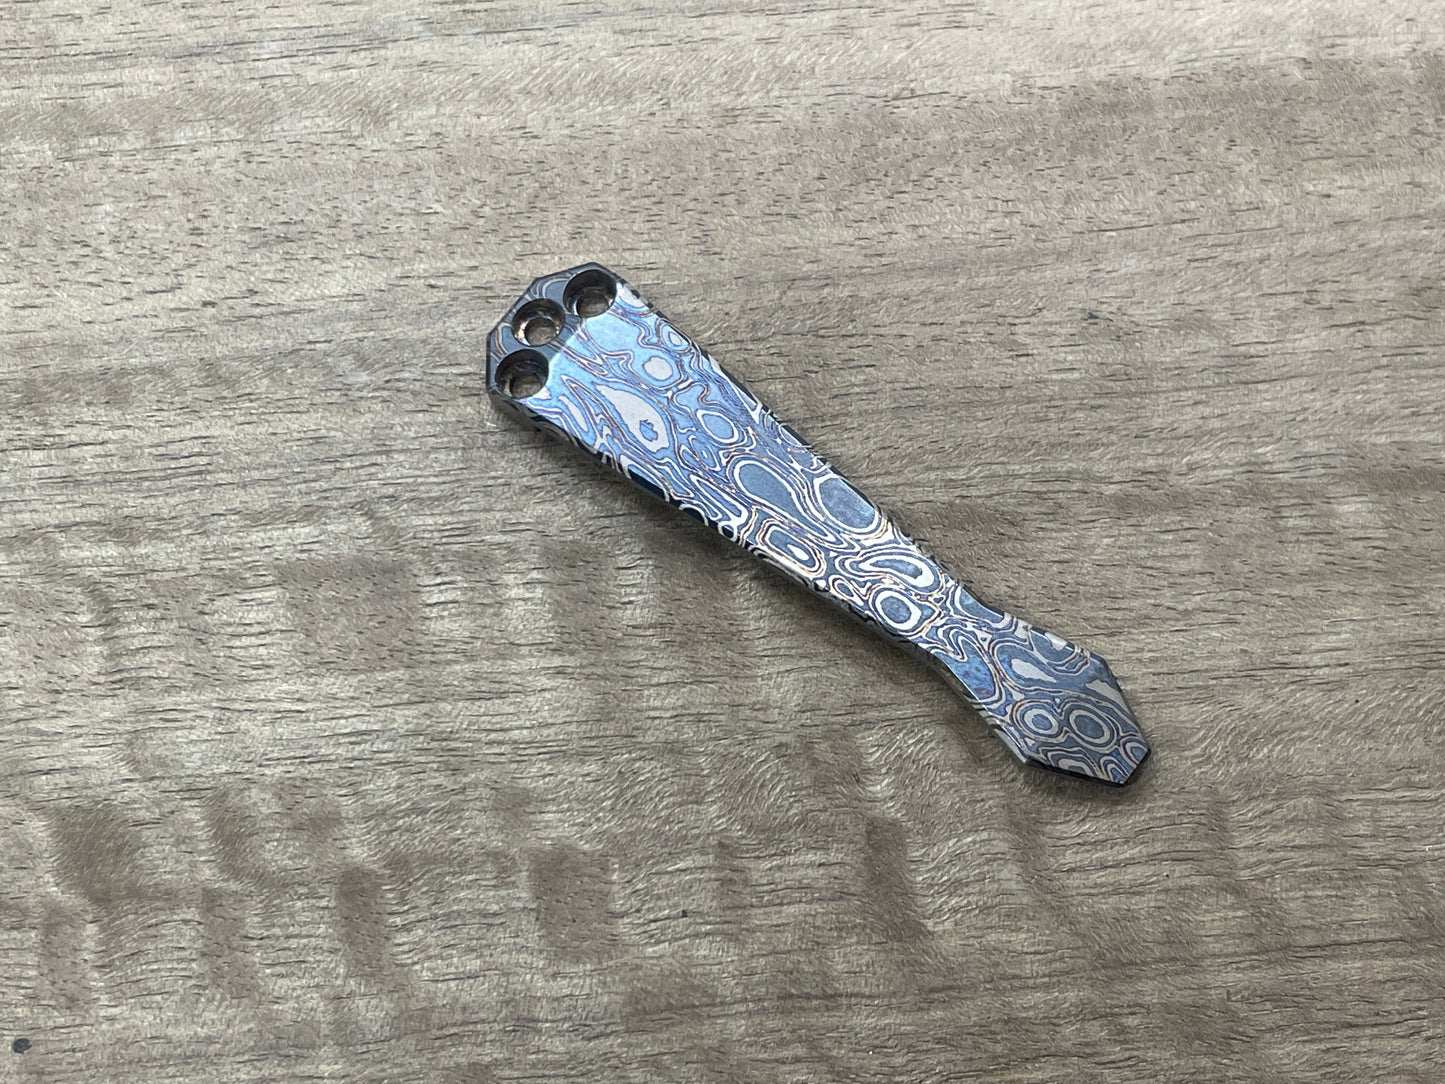 RAINDROP Timascus pattern heat ano Dmd Titanium CLIP for most Benchmade models